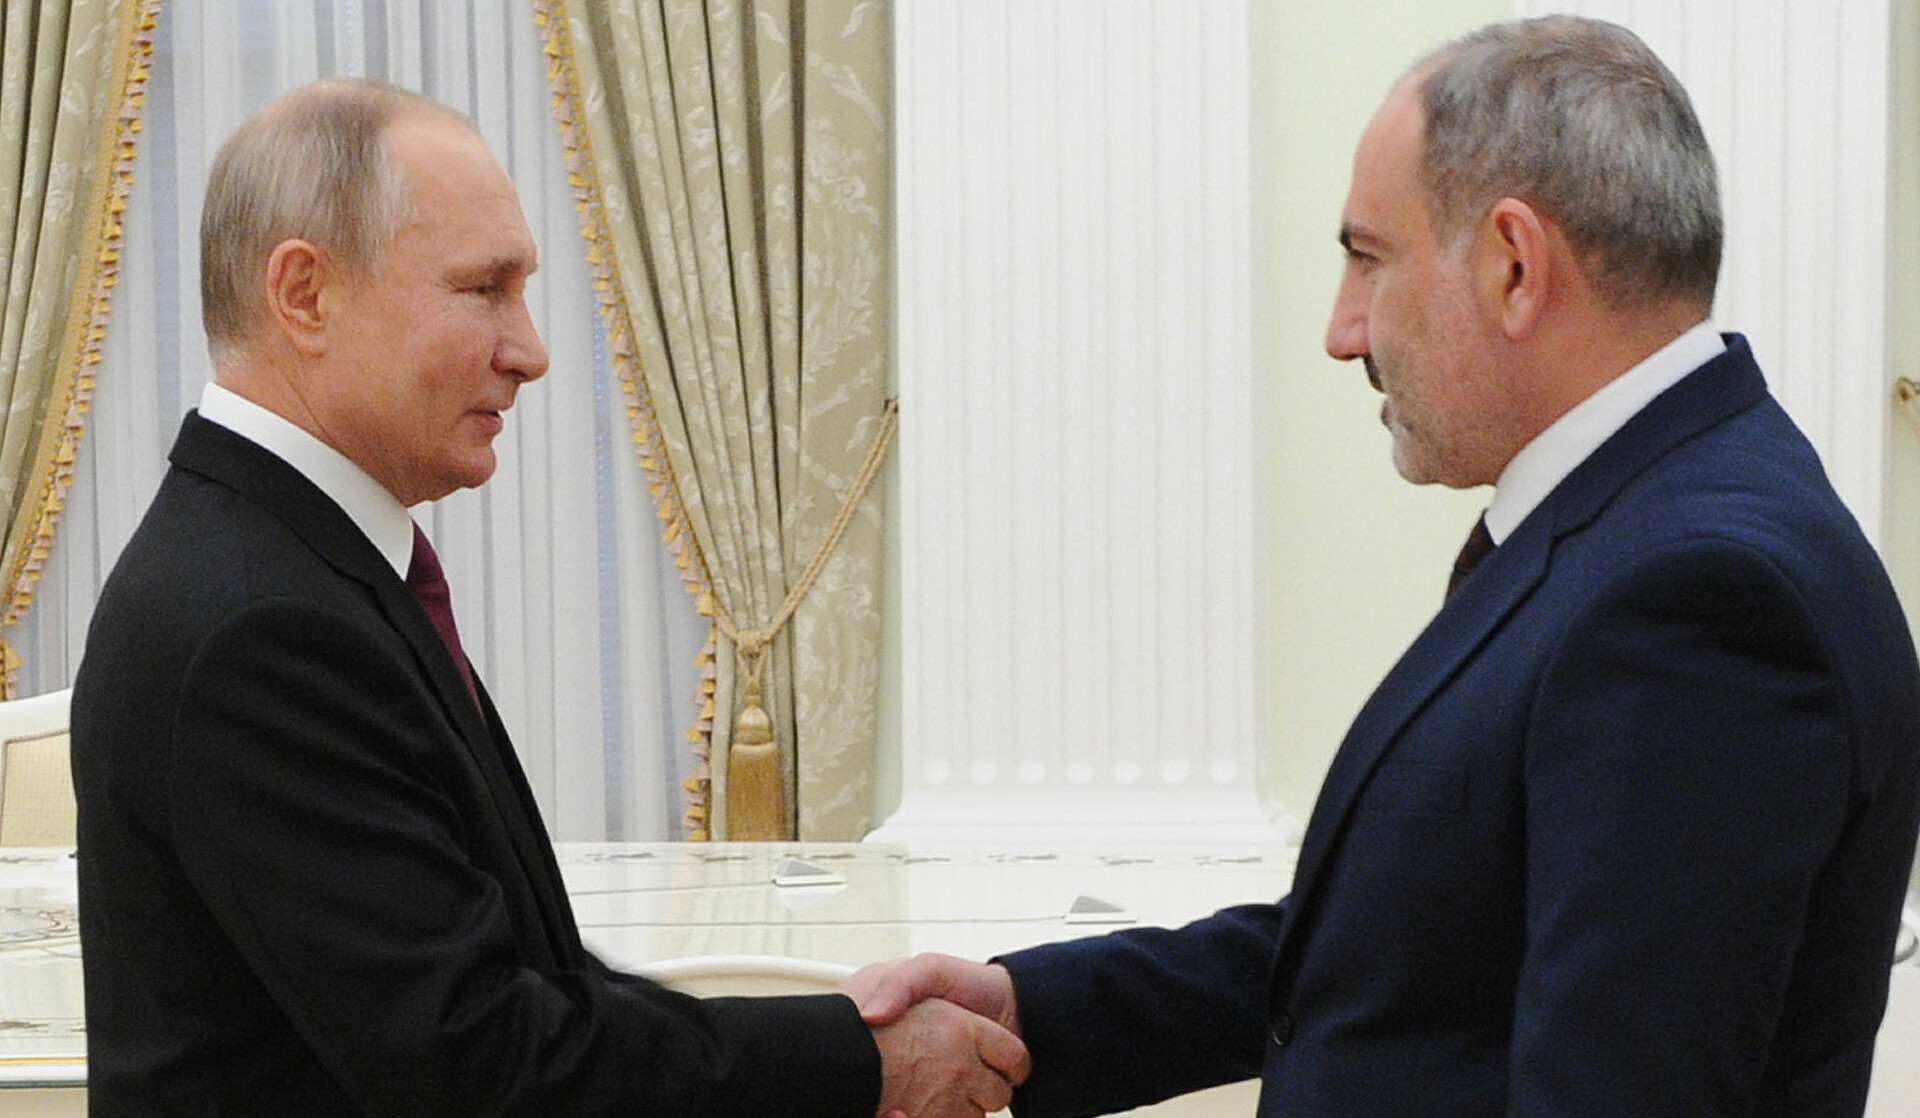 Nagorno-Karabakh conflict is still unresolved: Pashinyan at the meeting with Putin